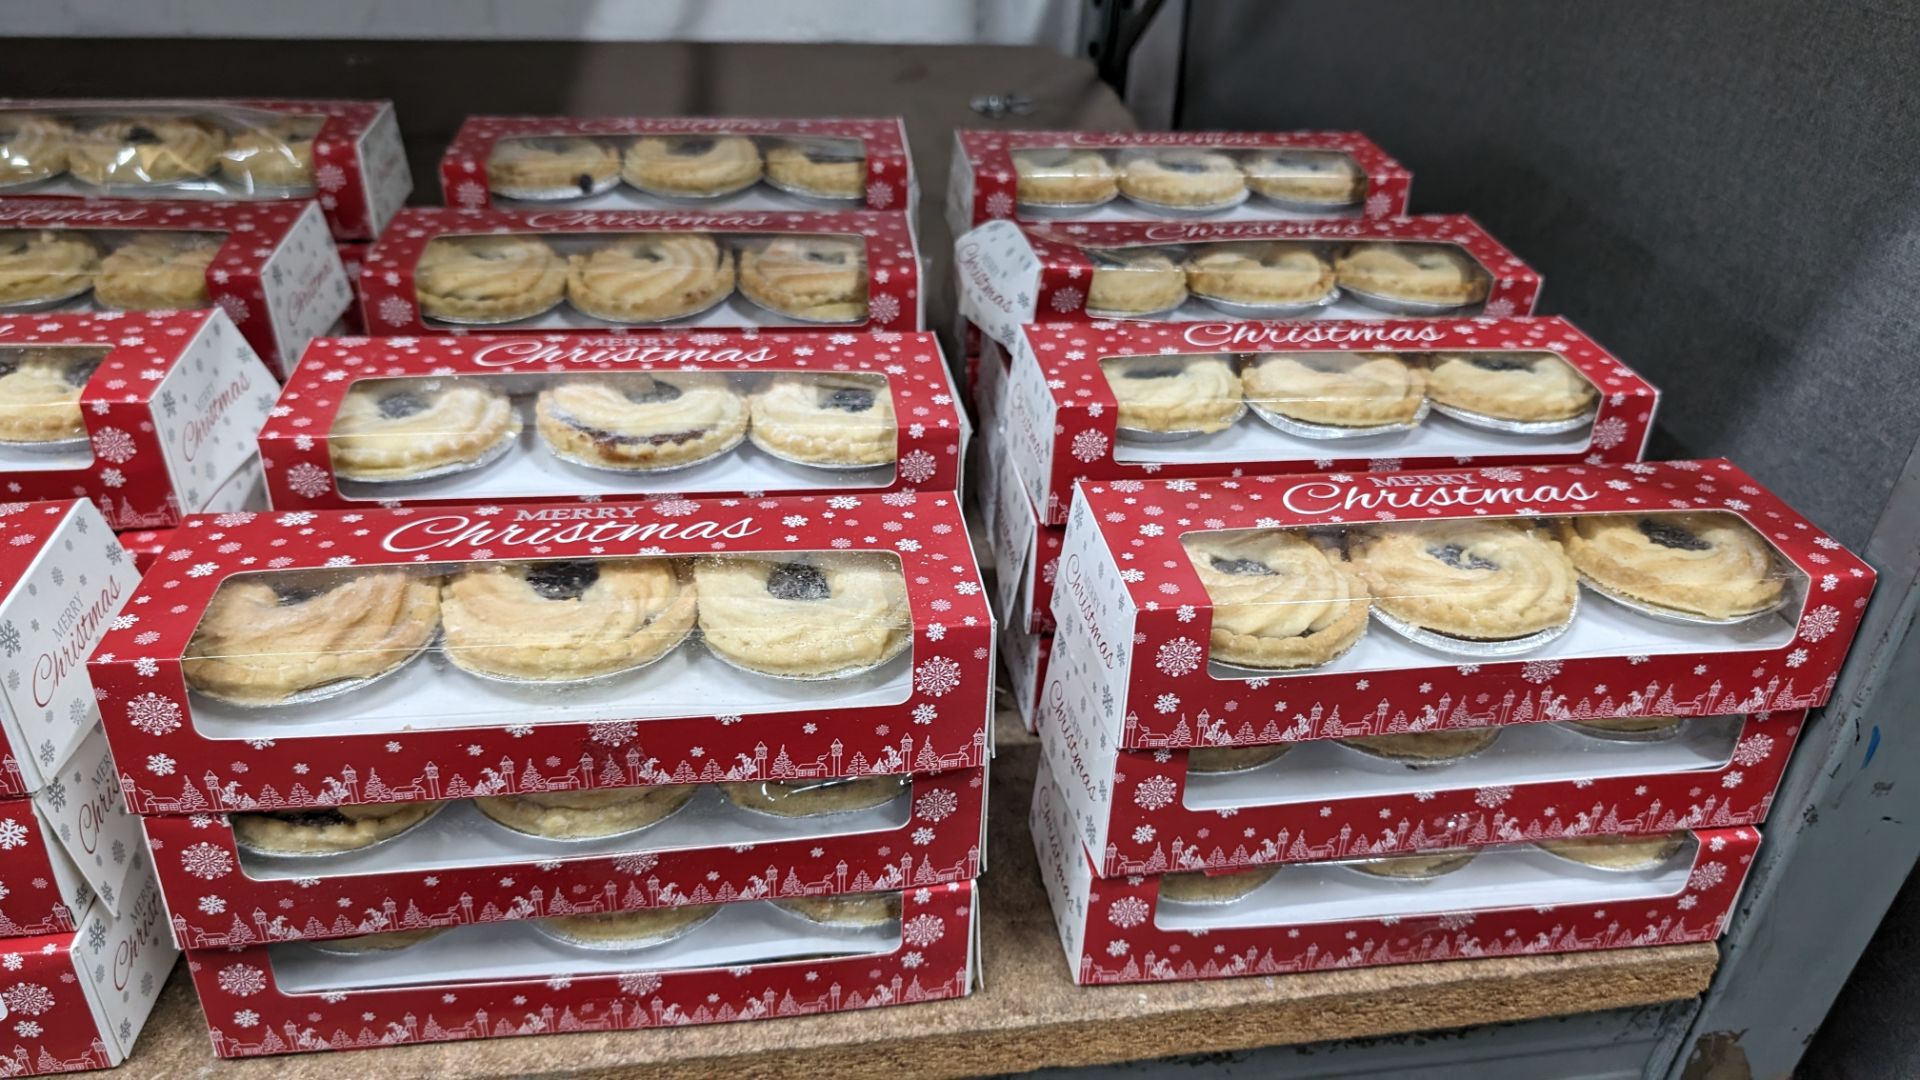 48 off 6 packs of Christmas mince pies. Each pack contains 6 pies on 2 layers & comes in Merry Chri - Image 4 of 5